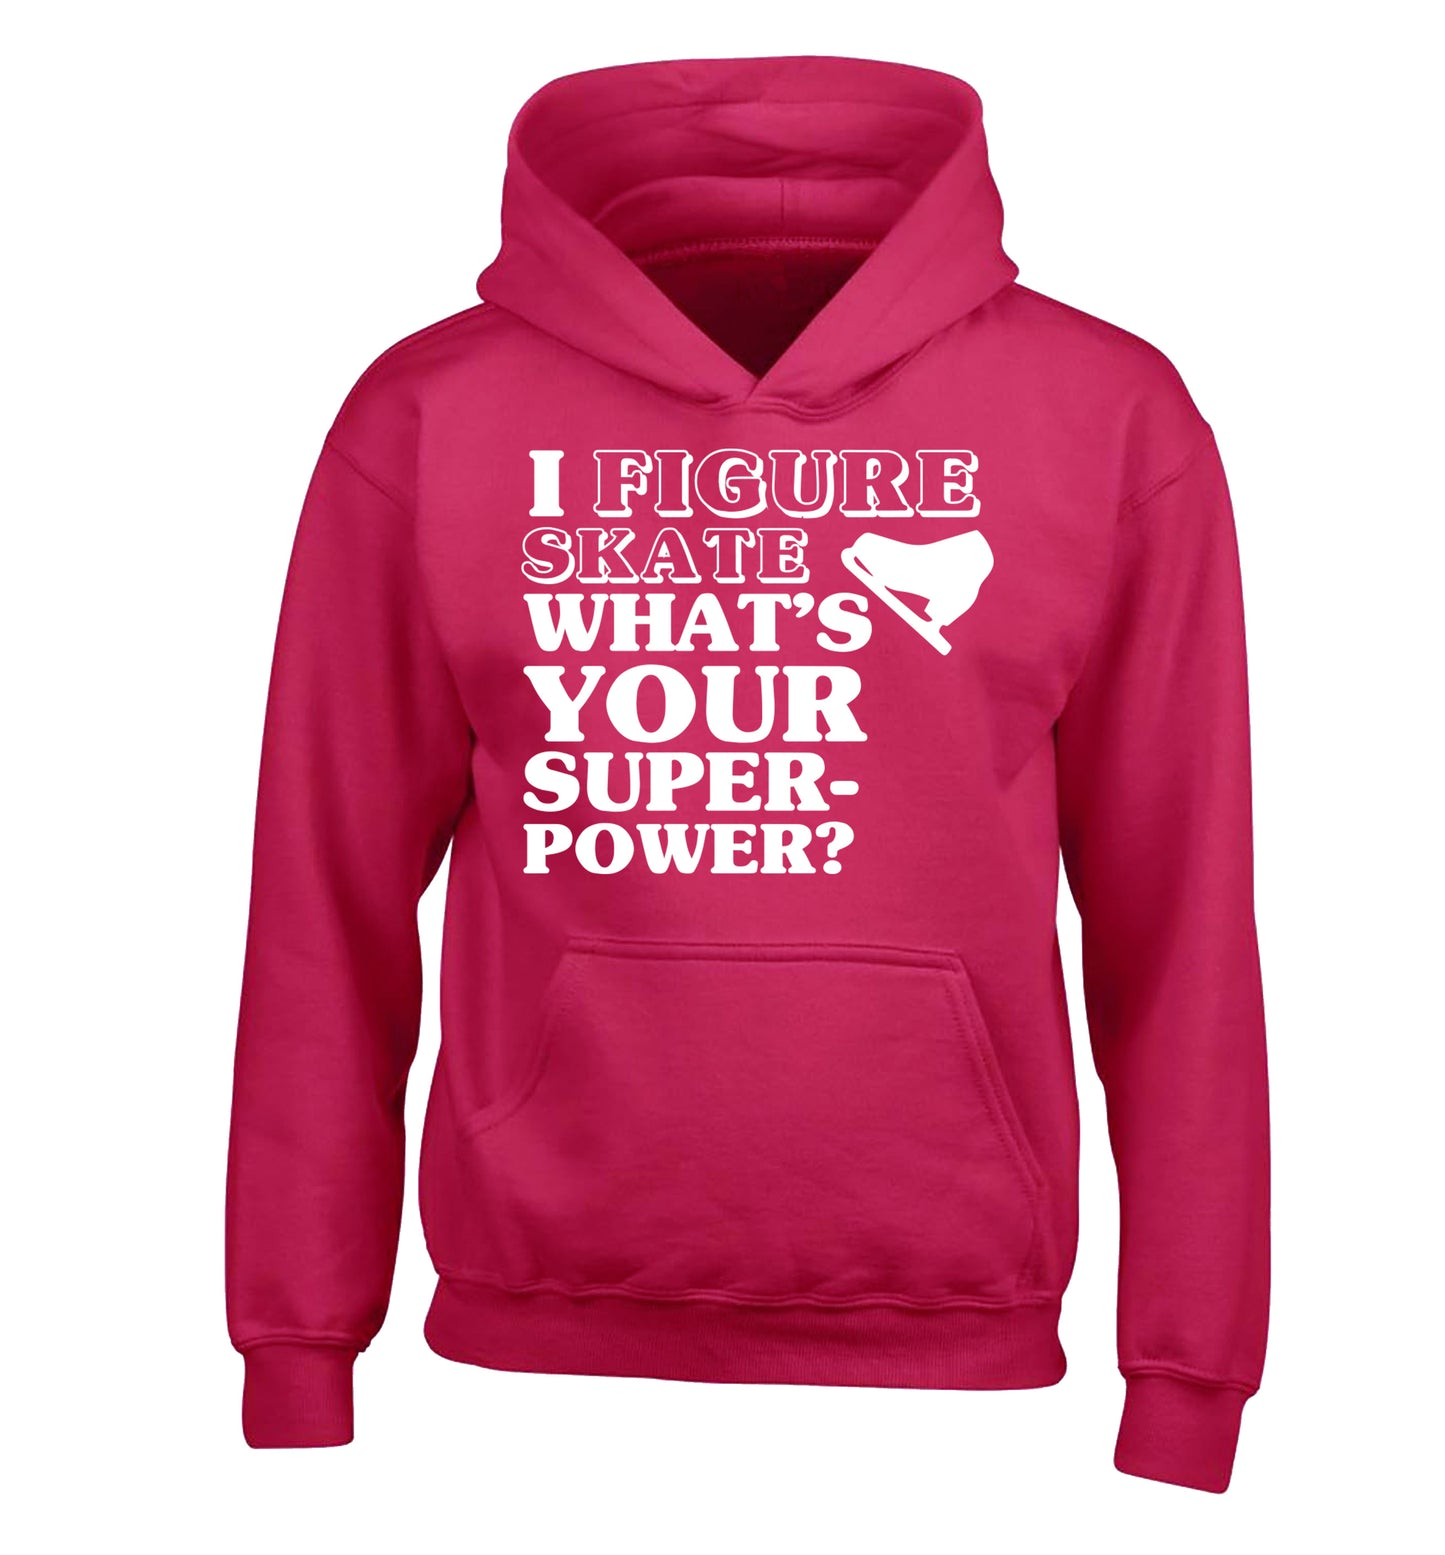 I figure skate what's your superpower? children's pink hoodie 12-14 Years